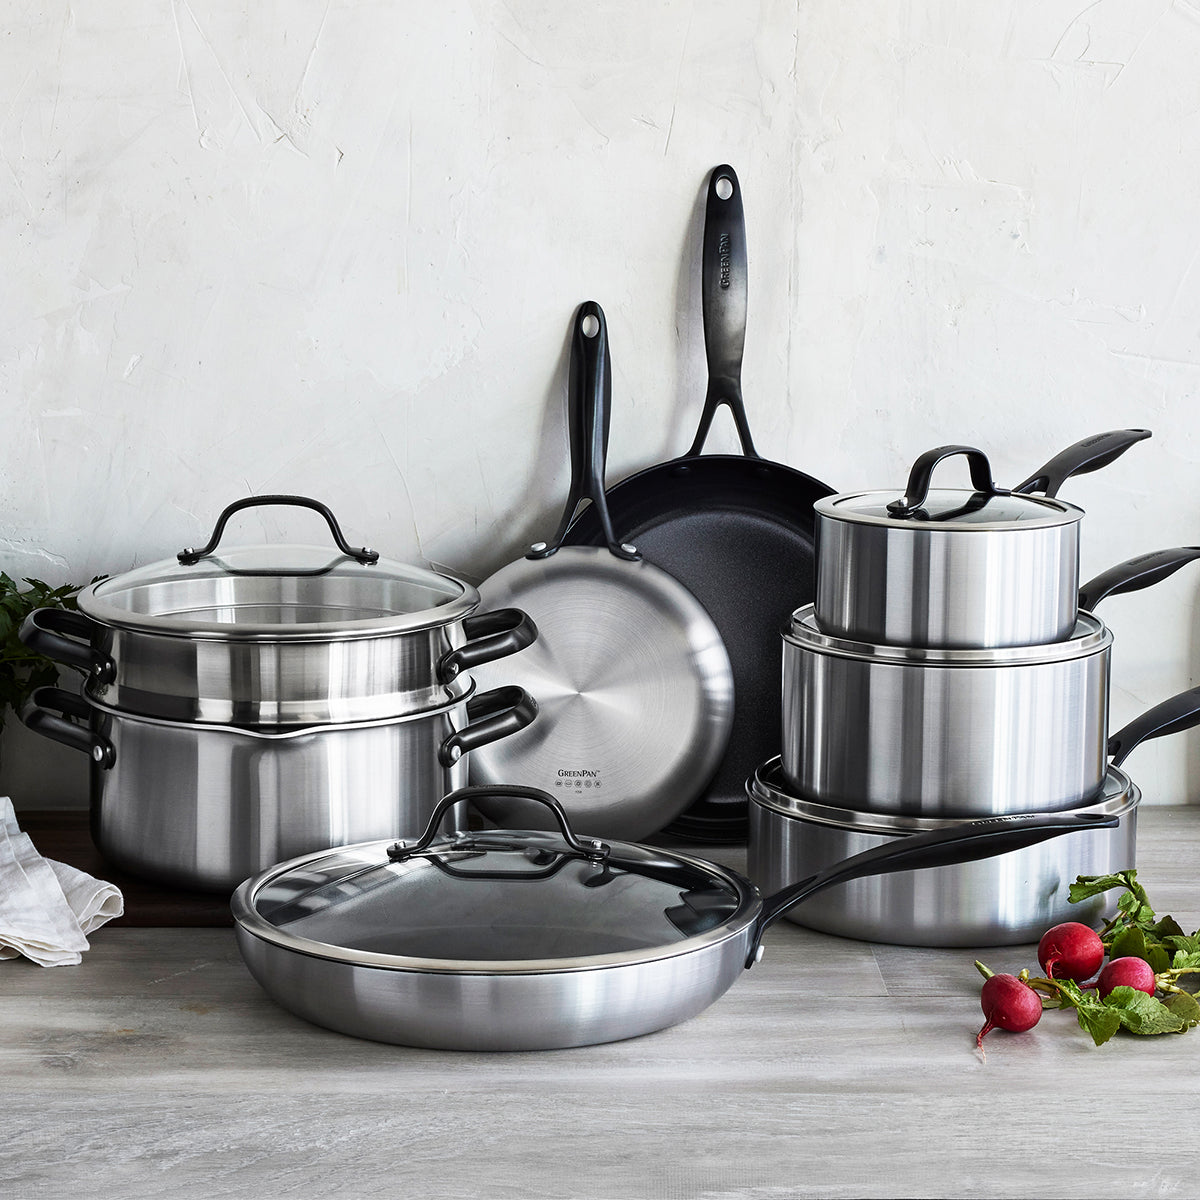 13 Piece Pots and Pans Set - Safe Nonstick Kitchen Cookware with